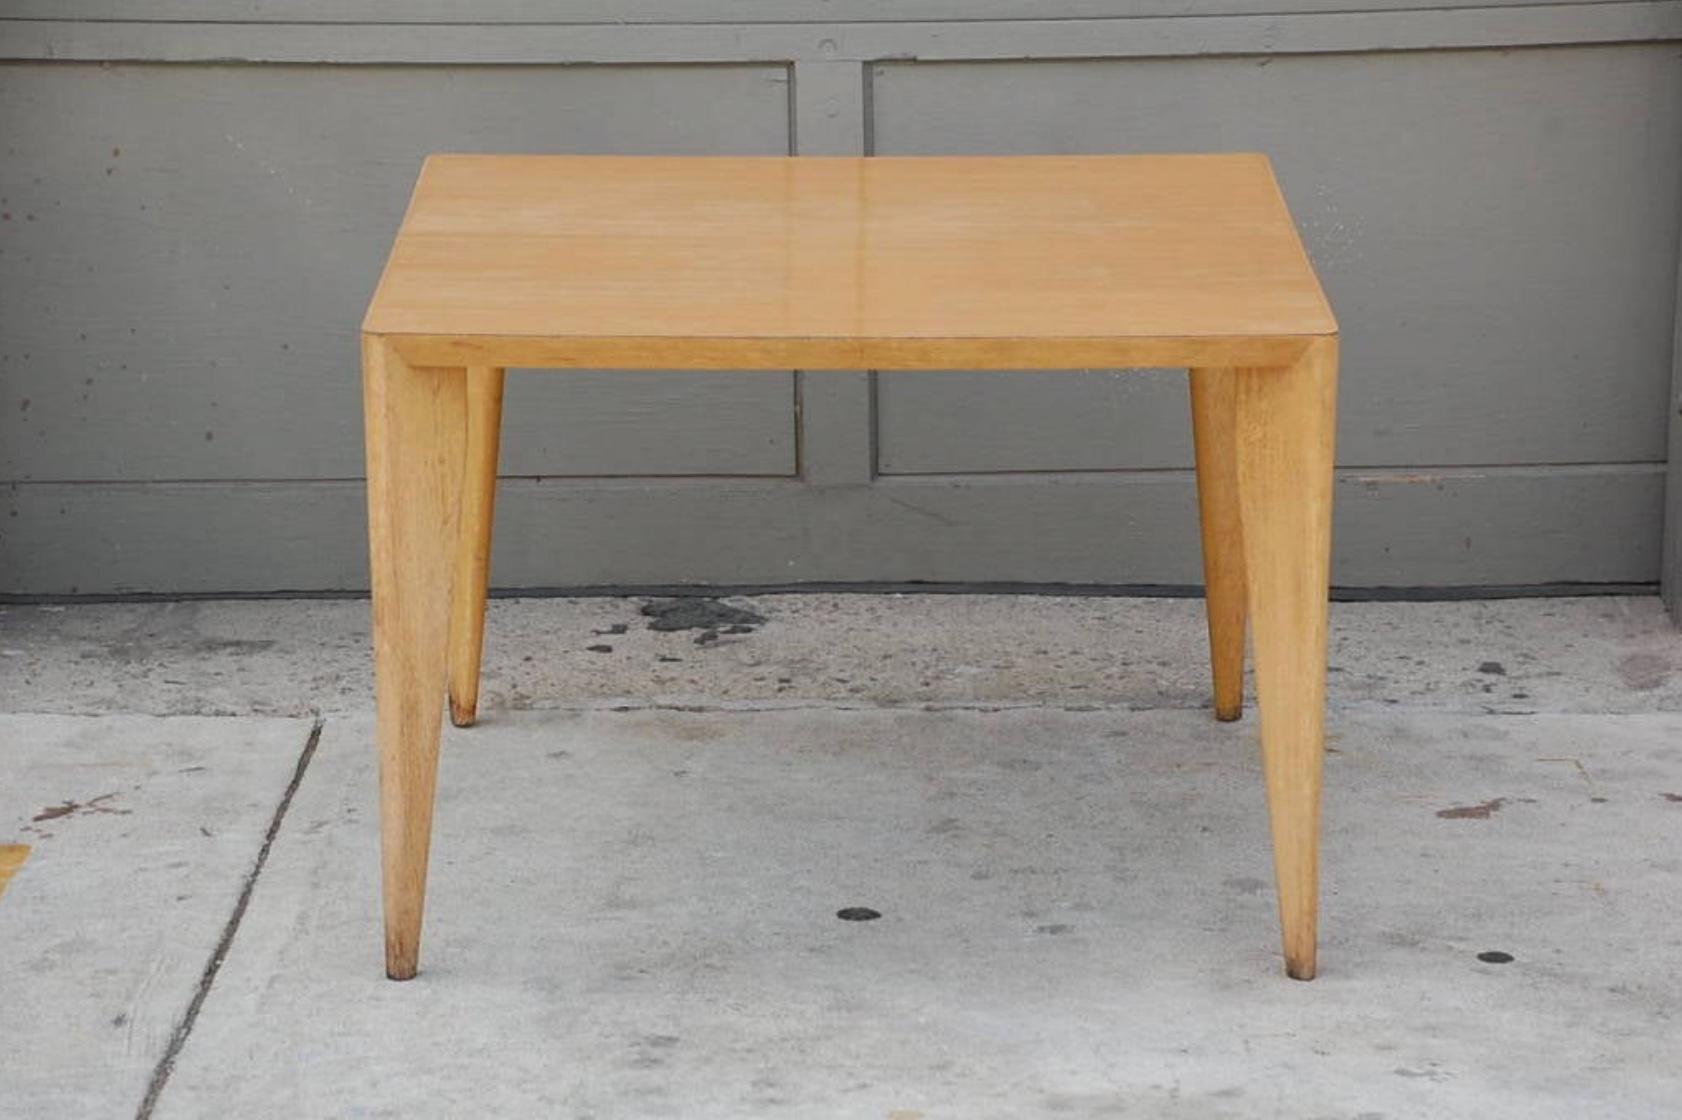 Bleached Wood Modernist Coffee/Side Table In Excellent Condition For Sale In Los Angeles, CA